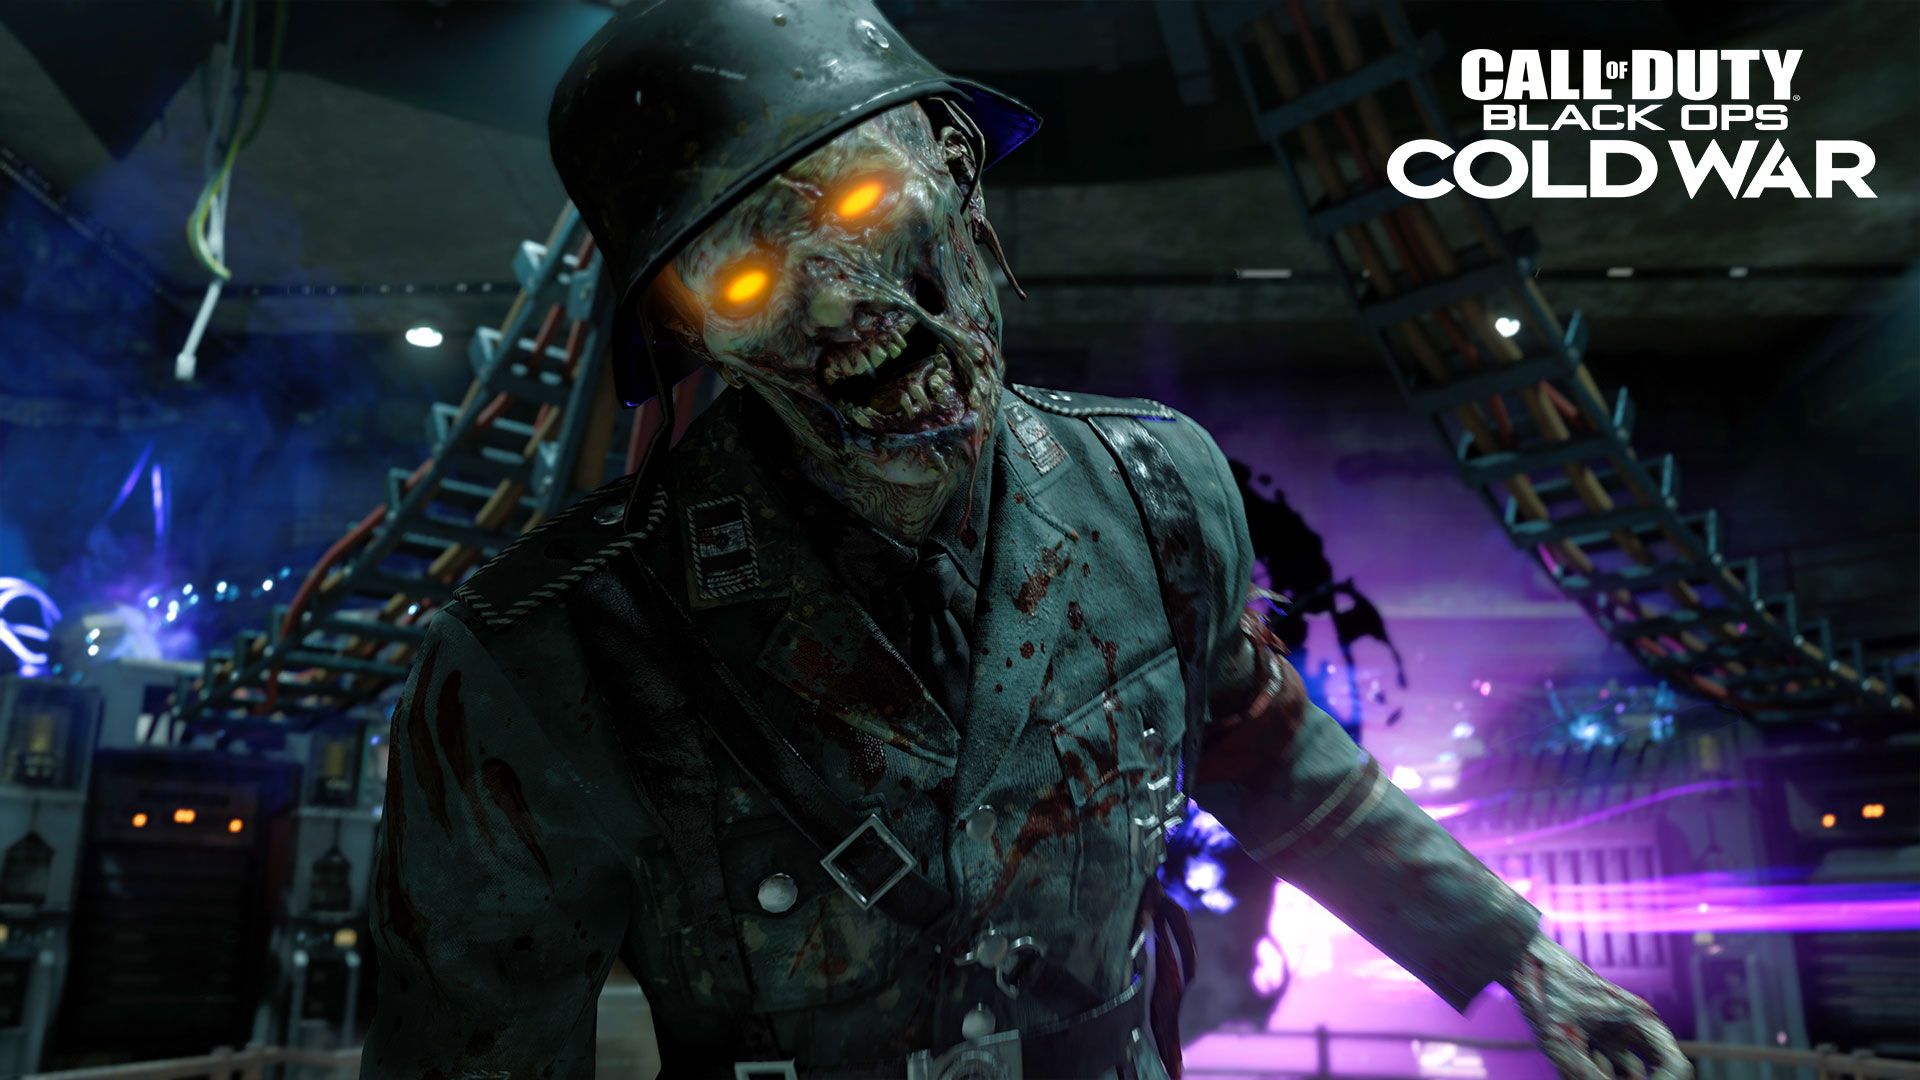 Call Of Duty Black Ops Cold War Zombies Rises Up From The Ground With New Cross Gen Details